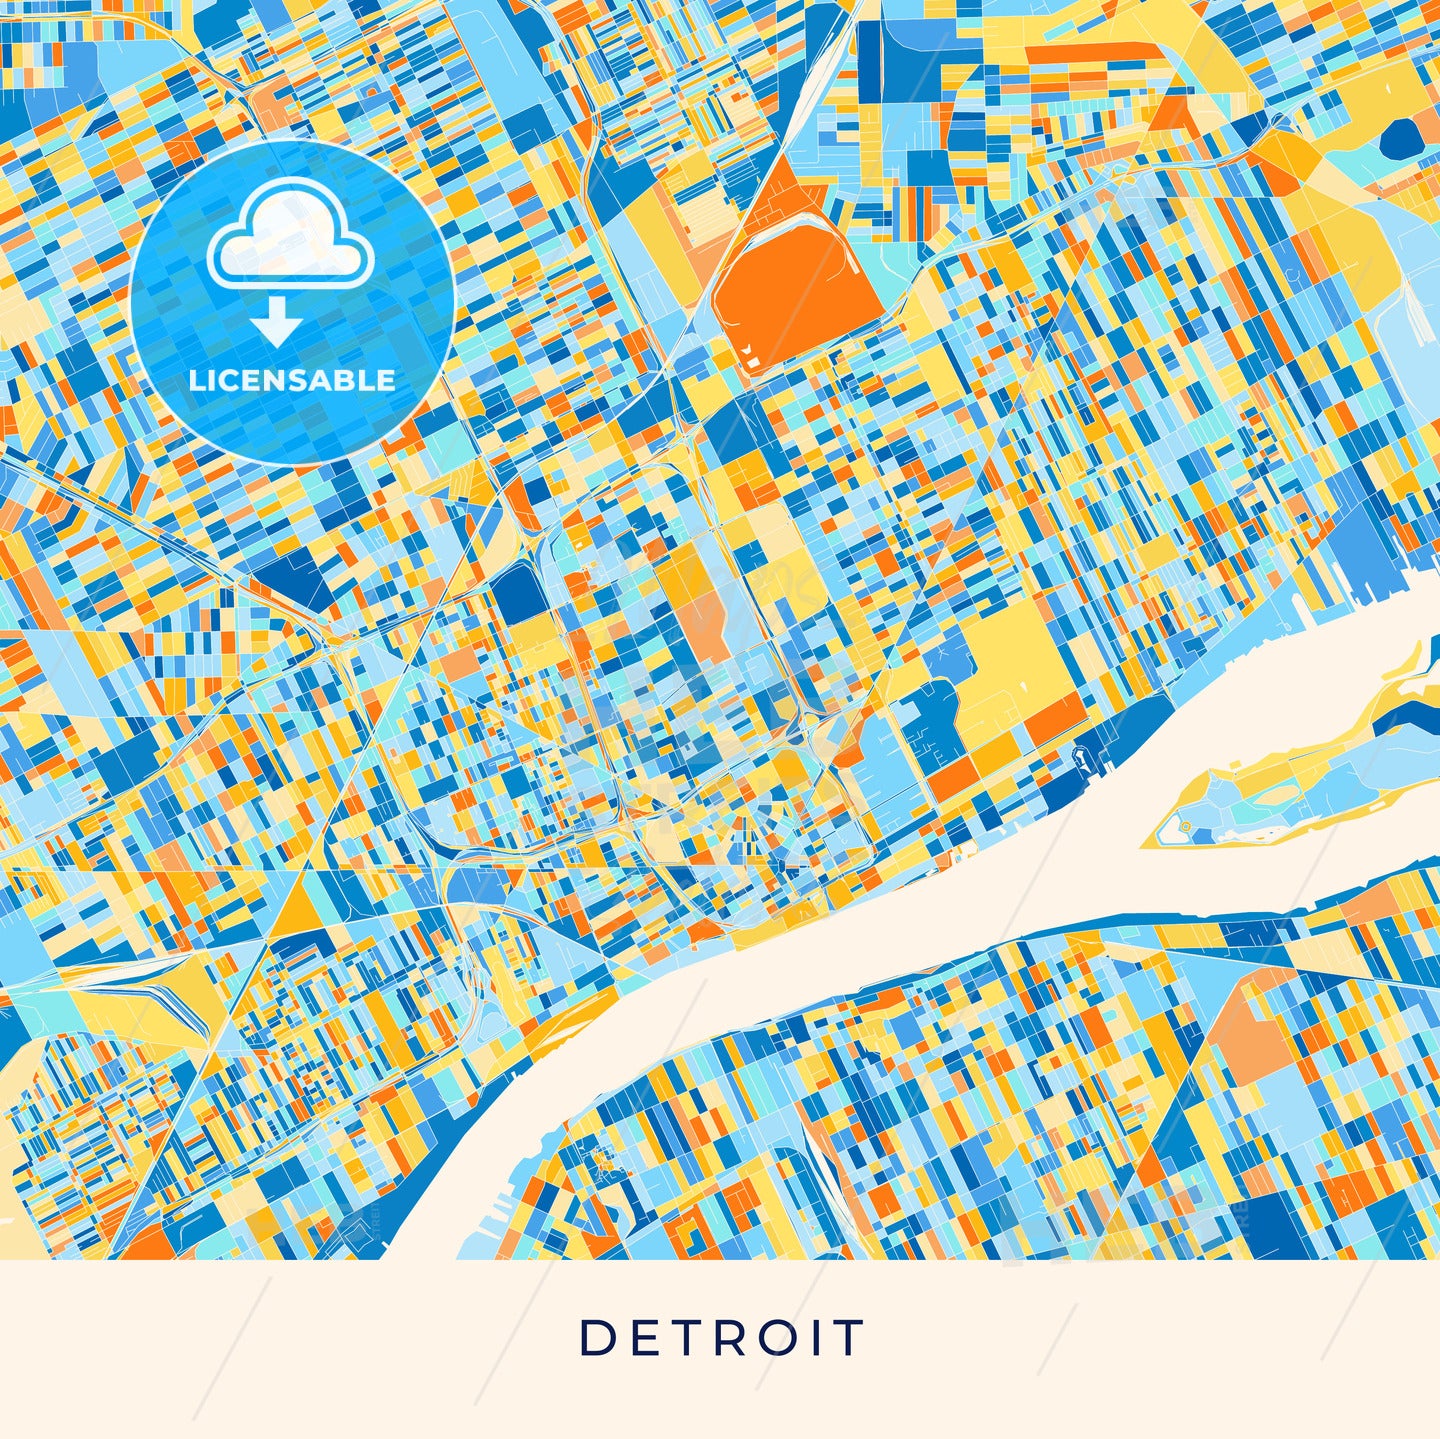 Detroit colorful map poster template